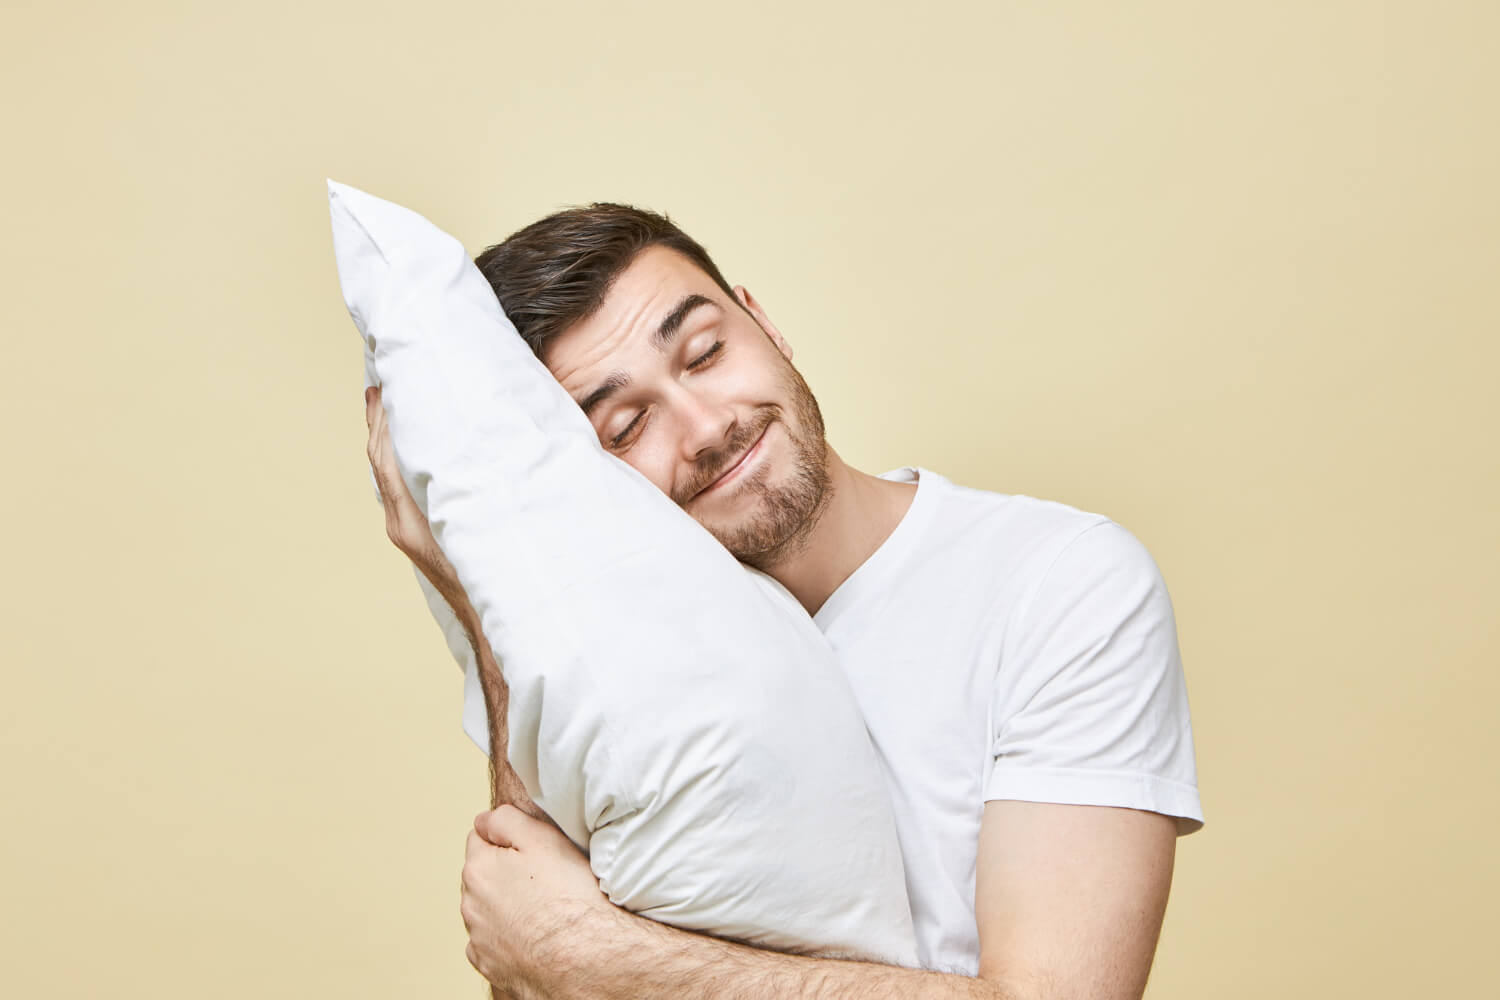 horizontal-image-handsome-cute-young-man-with-bristle-posing-with-head-white-soft-pillow-sleeping-peacefully-smiling-seeling-good-dream-attractive-guy-napping-after-hard-working-day